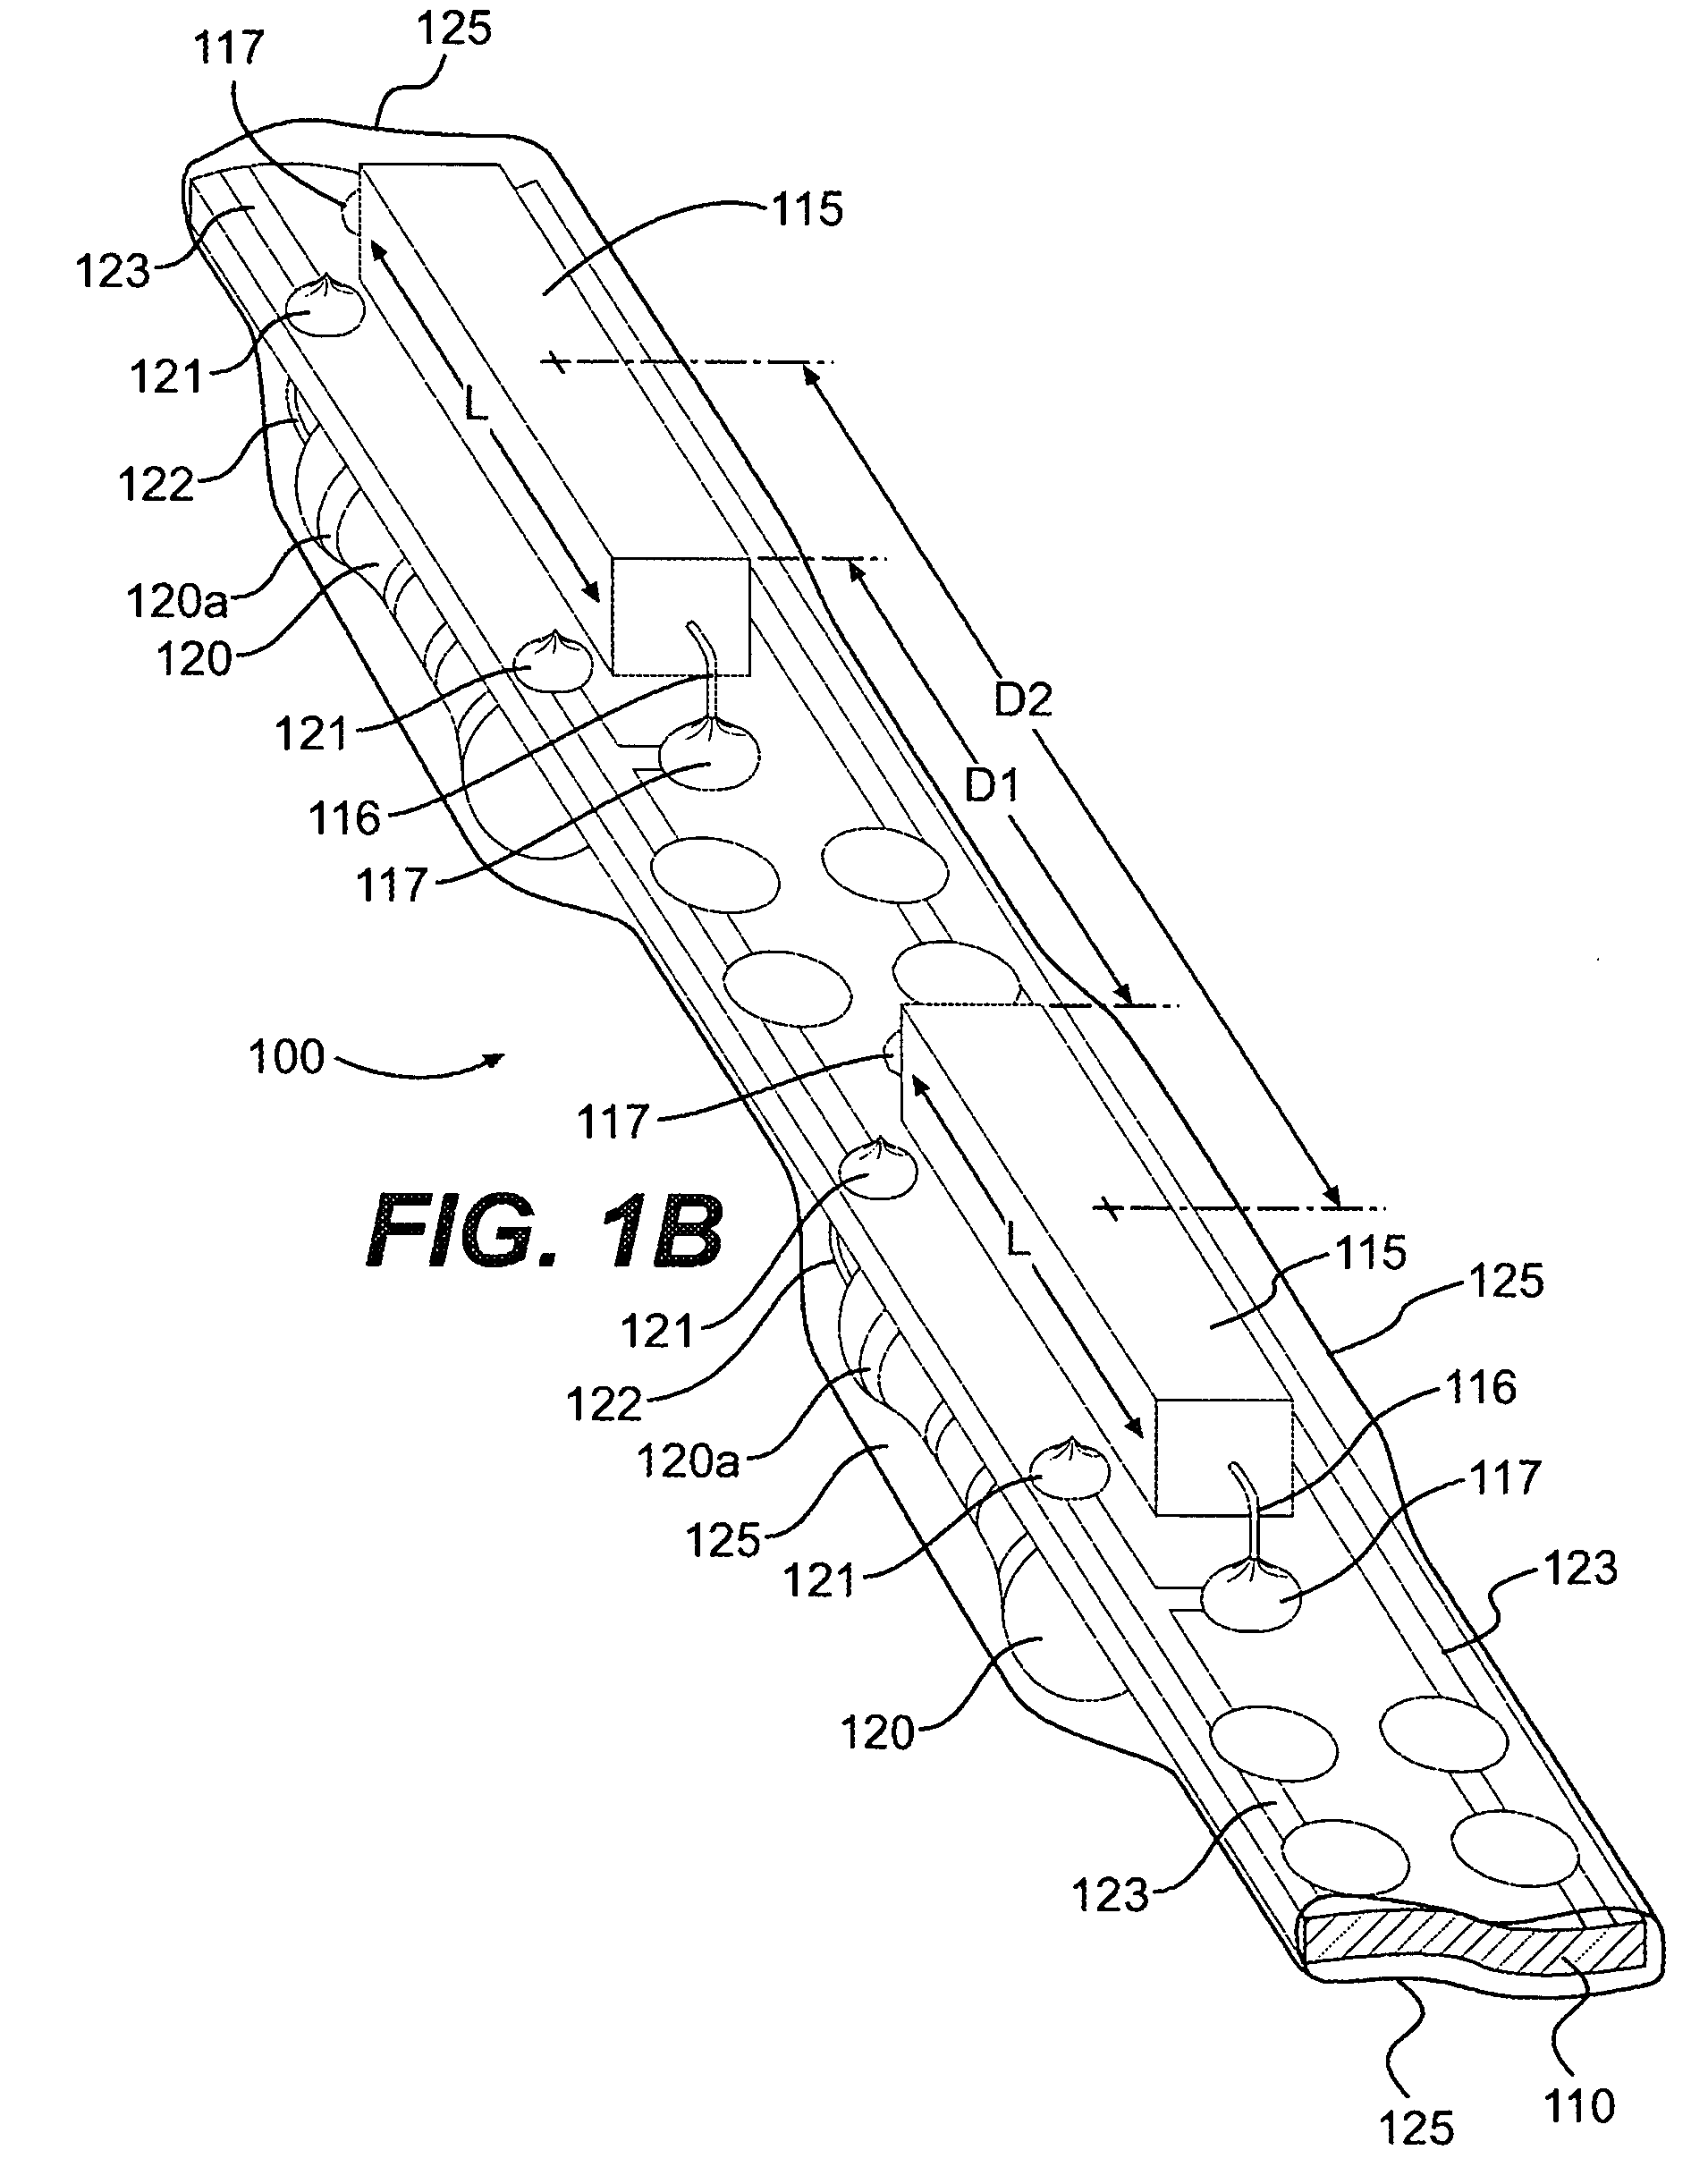 Level sending unit with flexible sensor board for monitoring the liquid level in containers and storage tanks